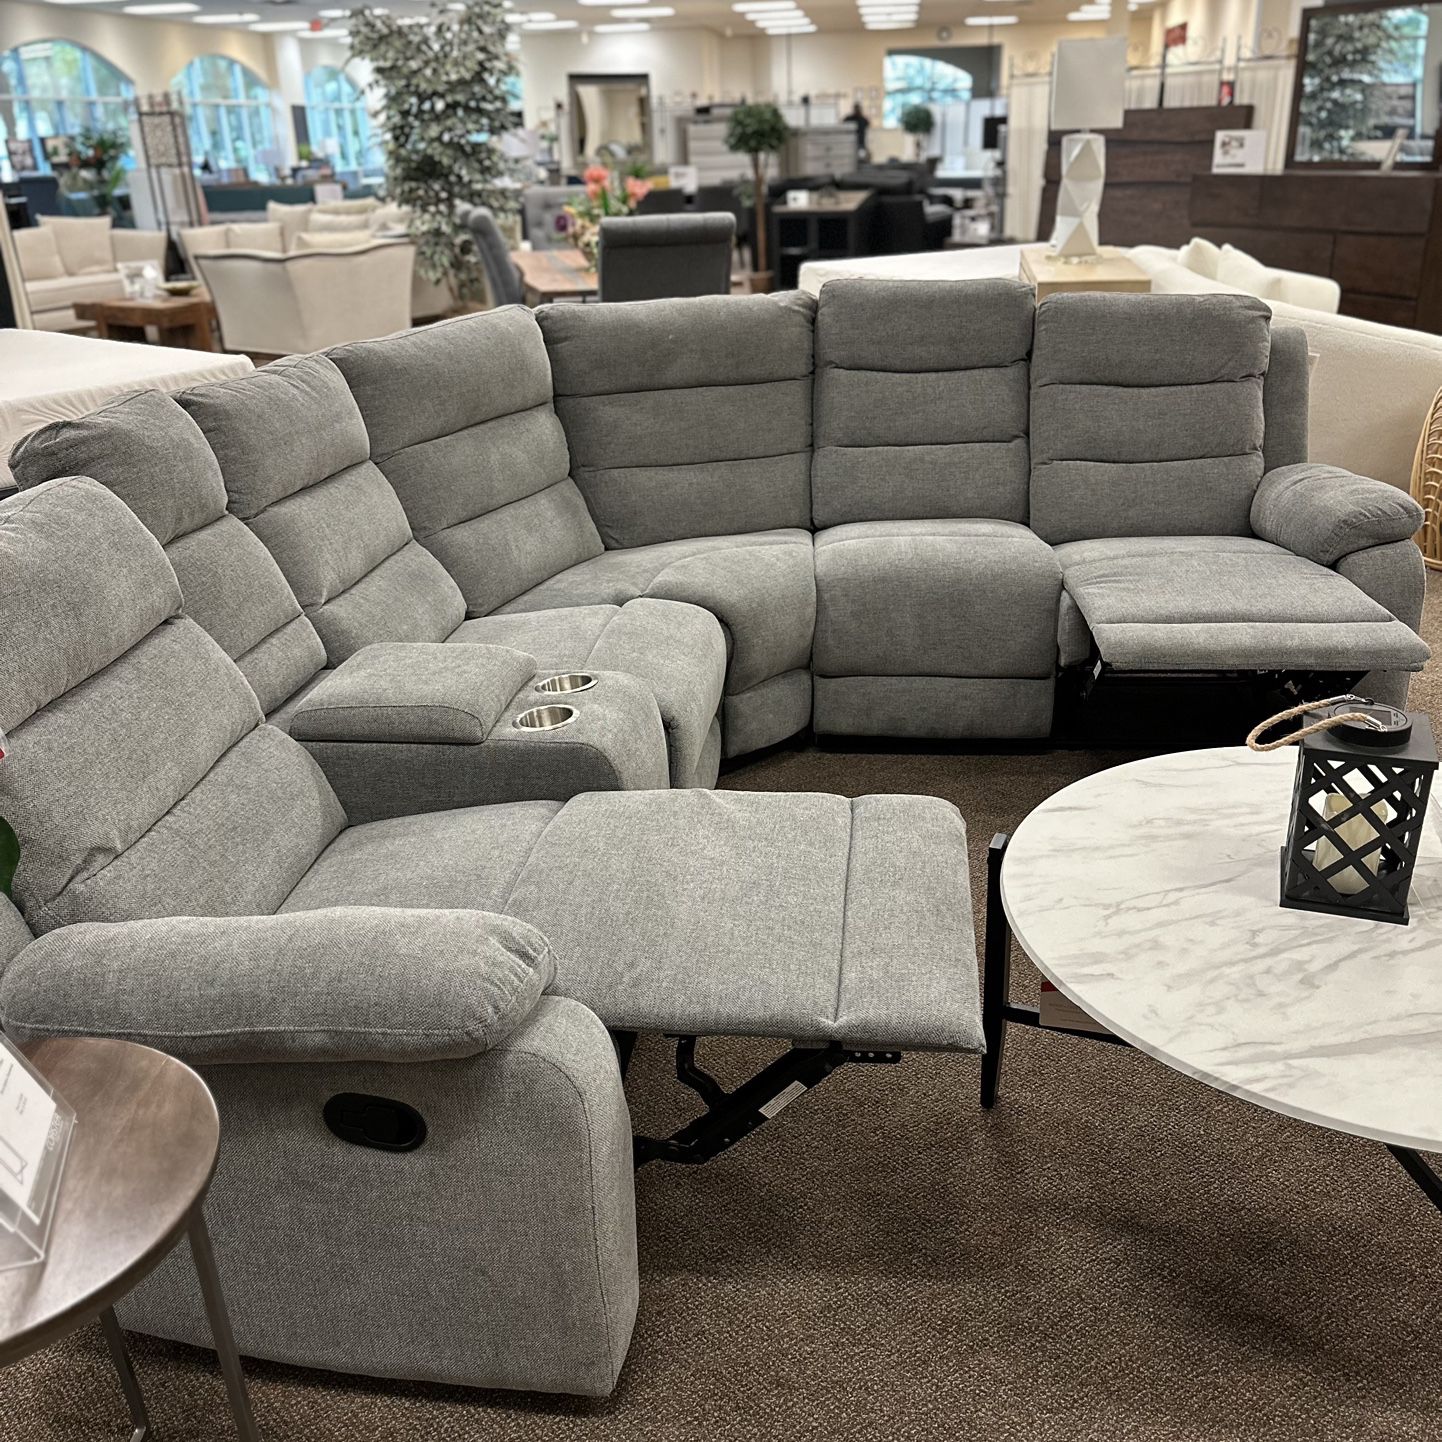 Brand new sectional in box- shop now pay later. 🔥Free Delivery🔥 